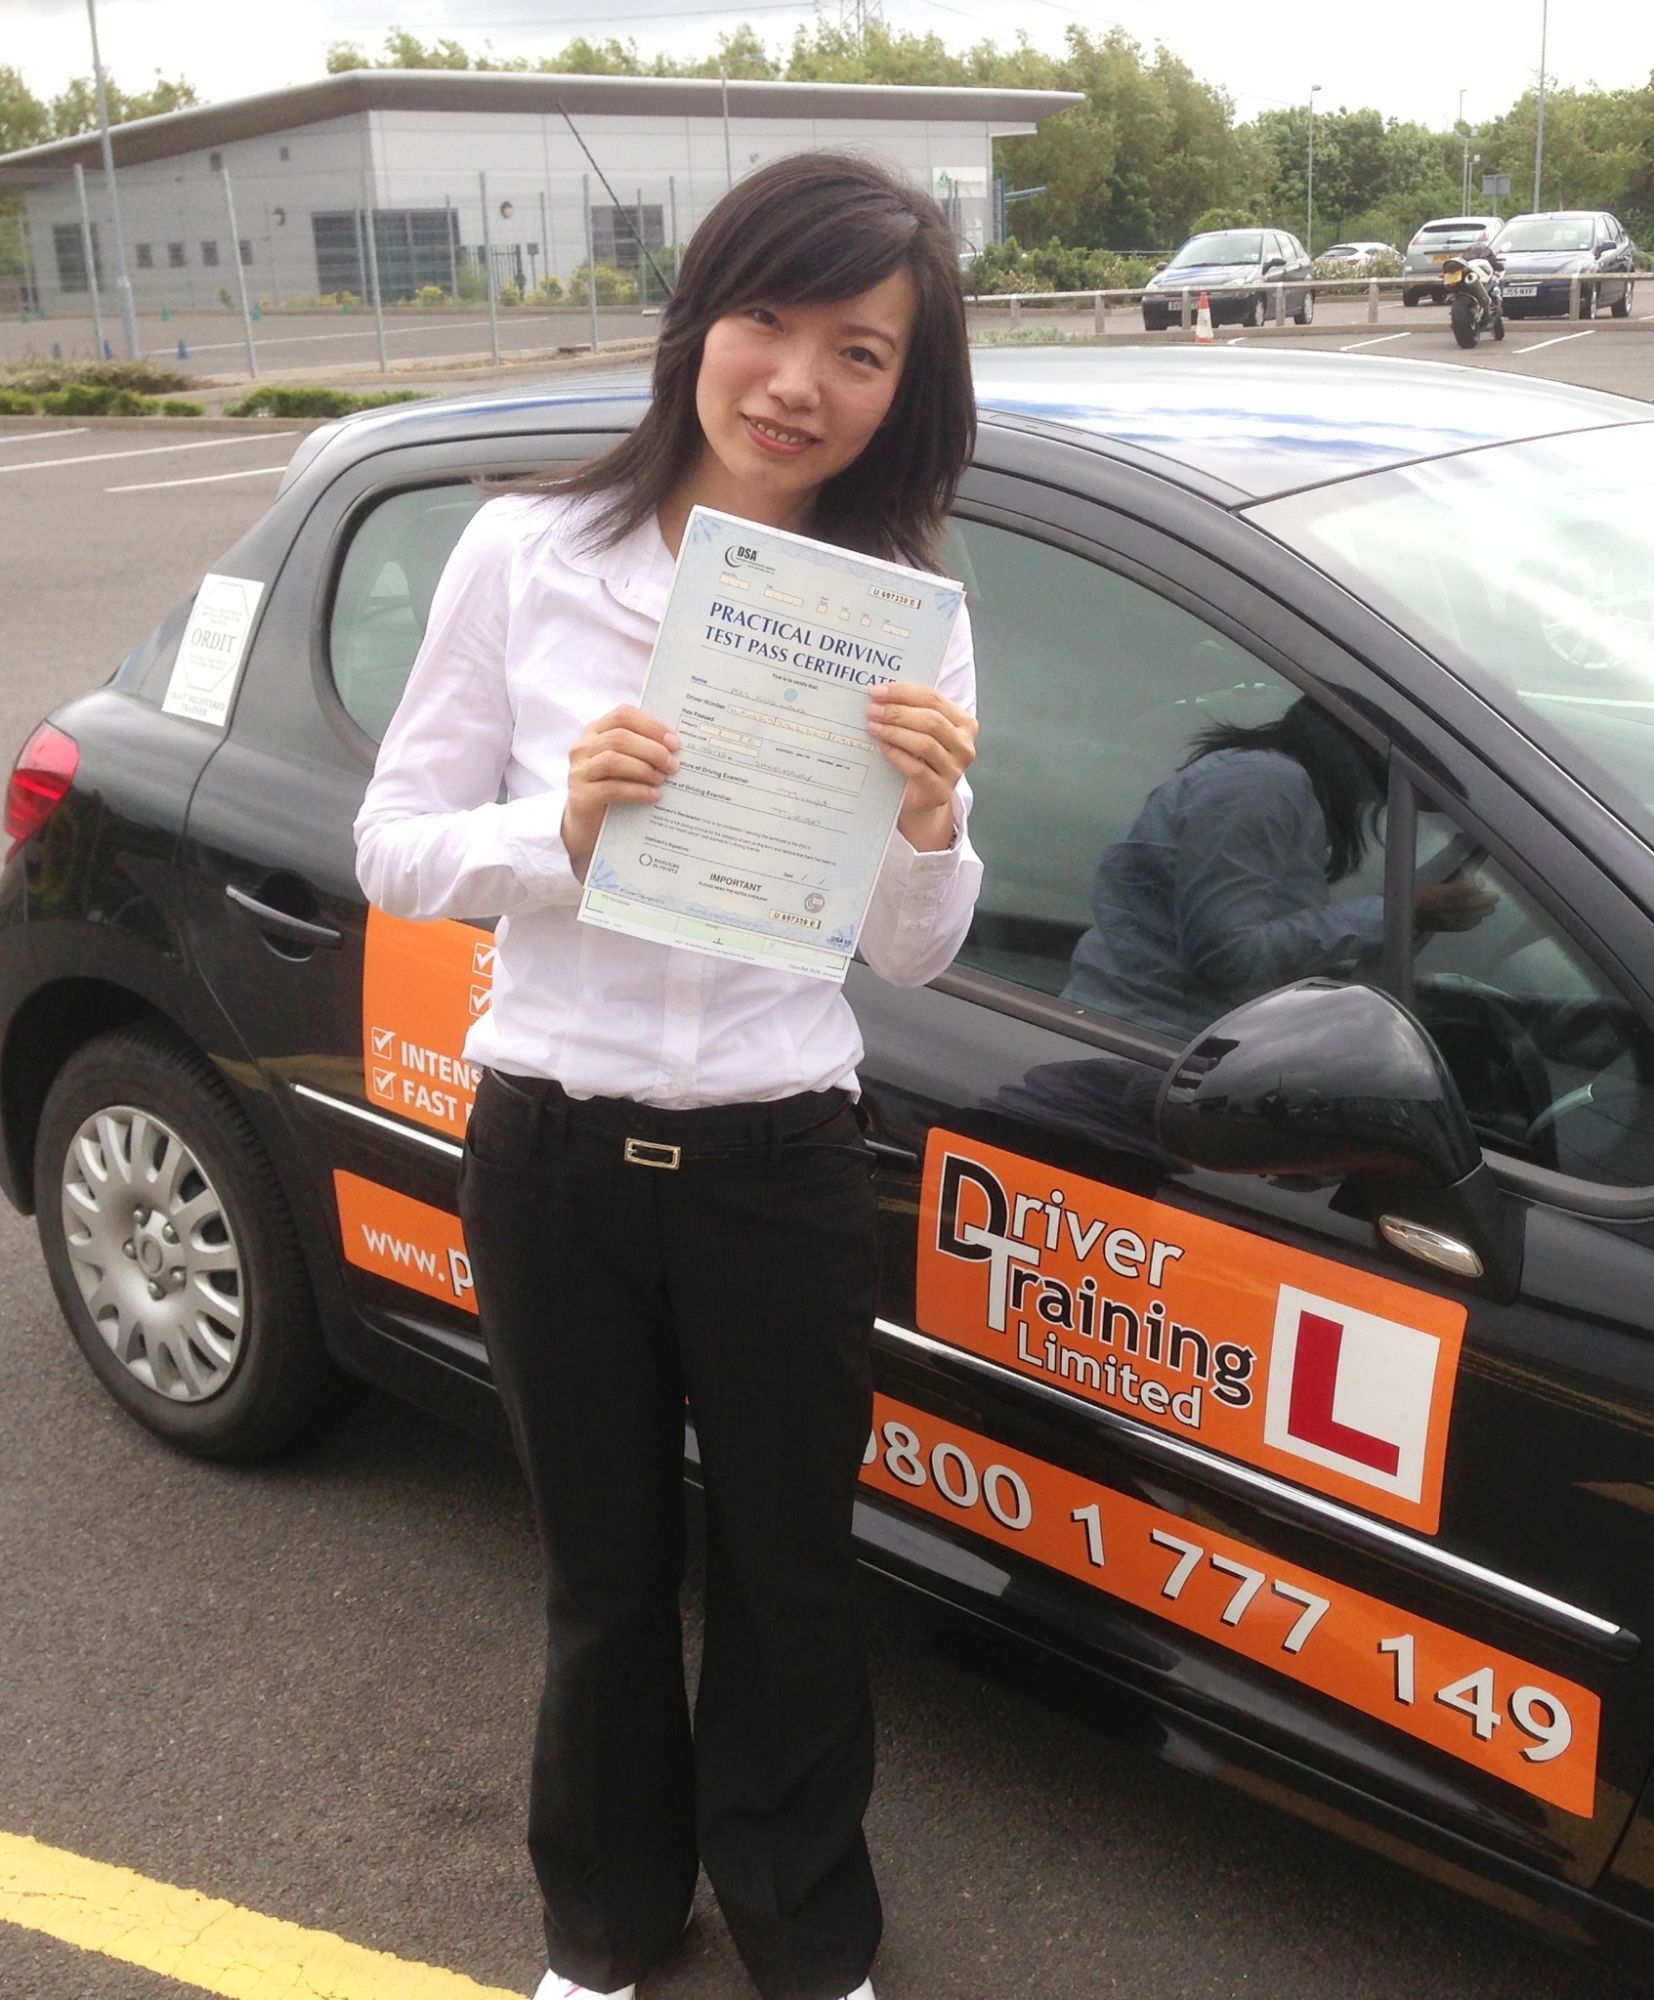 Pass your test fast!  Do you need to pass your test quickly? Then let us tailor the right intensive driving course for you.  If you donâ€™t have the time to take regular weekly lessons or need to pass by a certain date, going intensive could be the perfect solution for you.  Why take intensive driving lessons?  Our fast pass courses allow pupils to quickly gain momentum in their learning and take their test soon after. With the right trainer and the right course, this method of training can bring you up to test standard more quickly than weekly driving lessons.